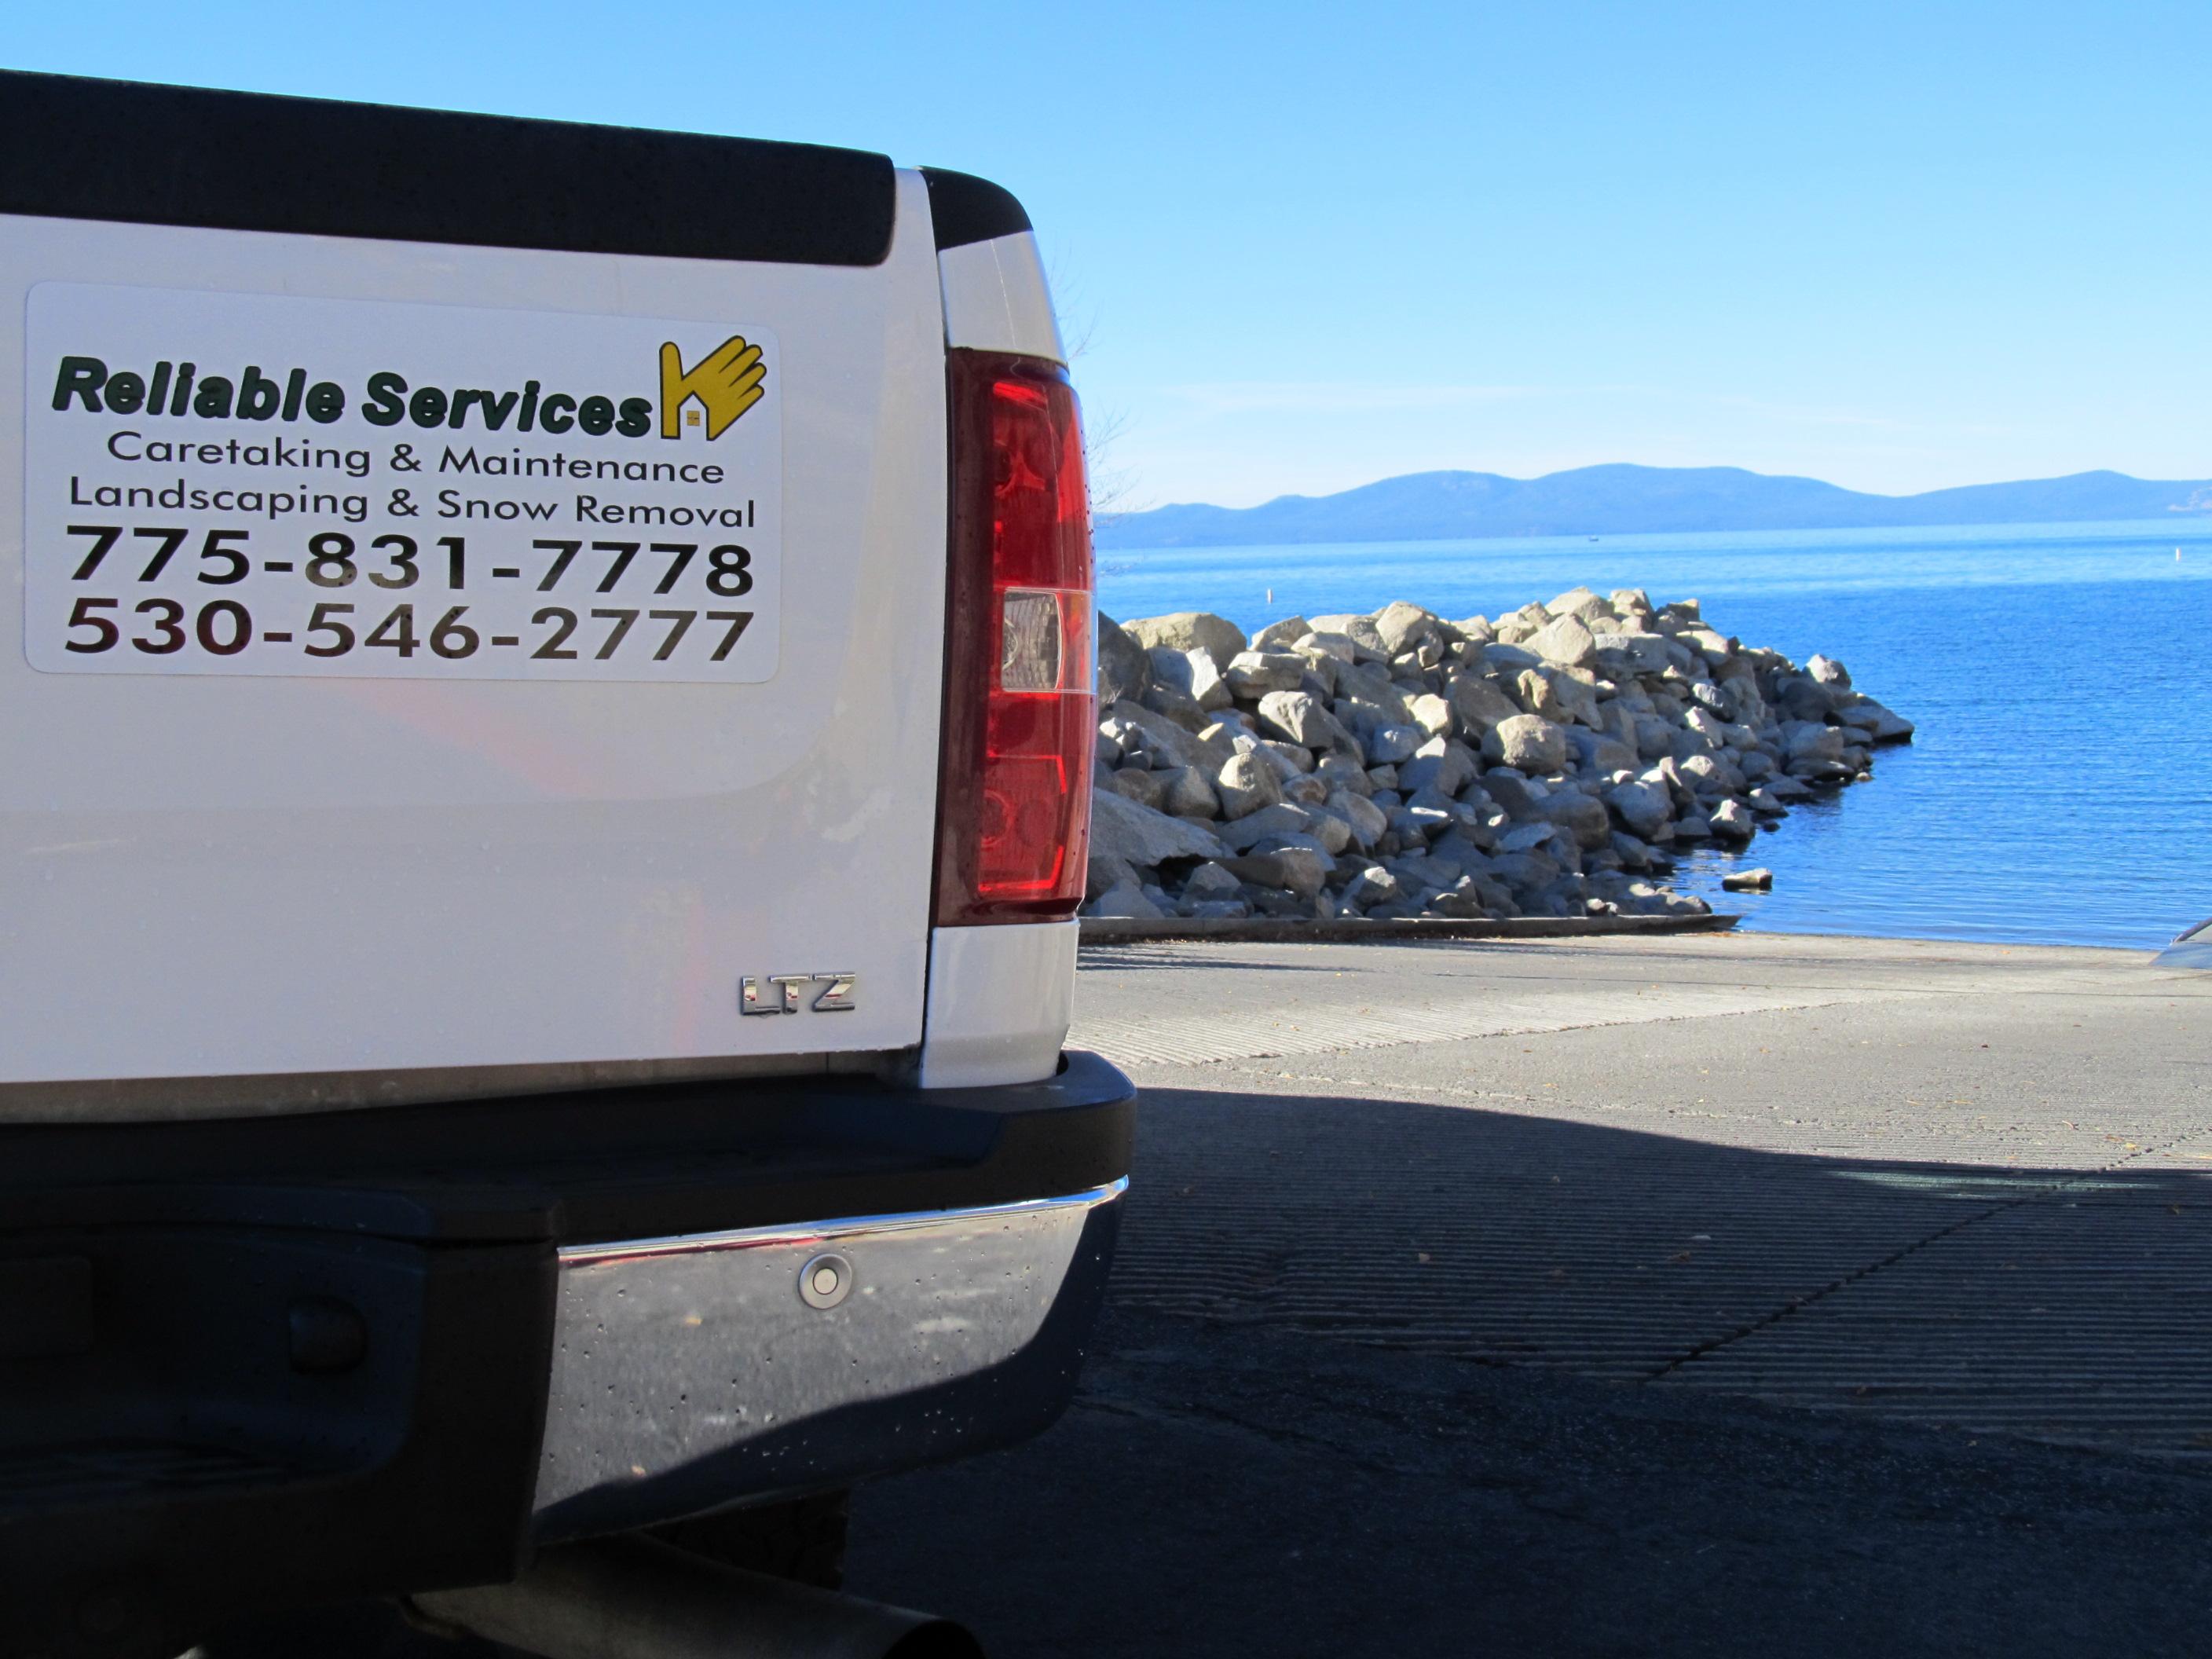 Reliable Services at Lake Tahoe